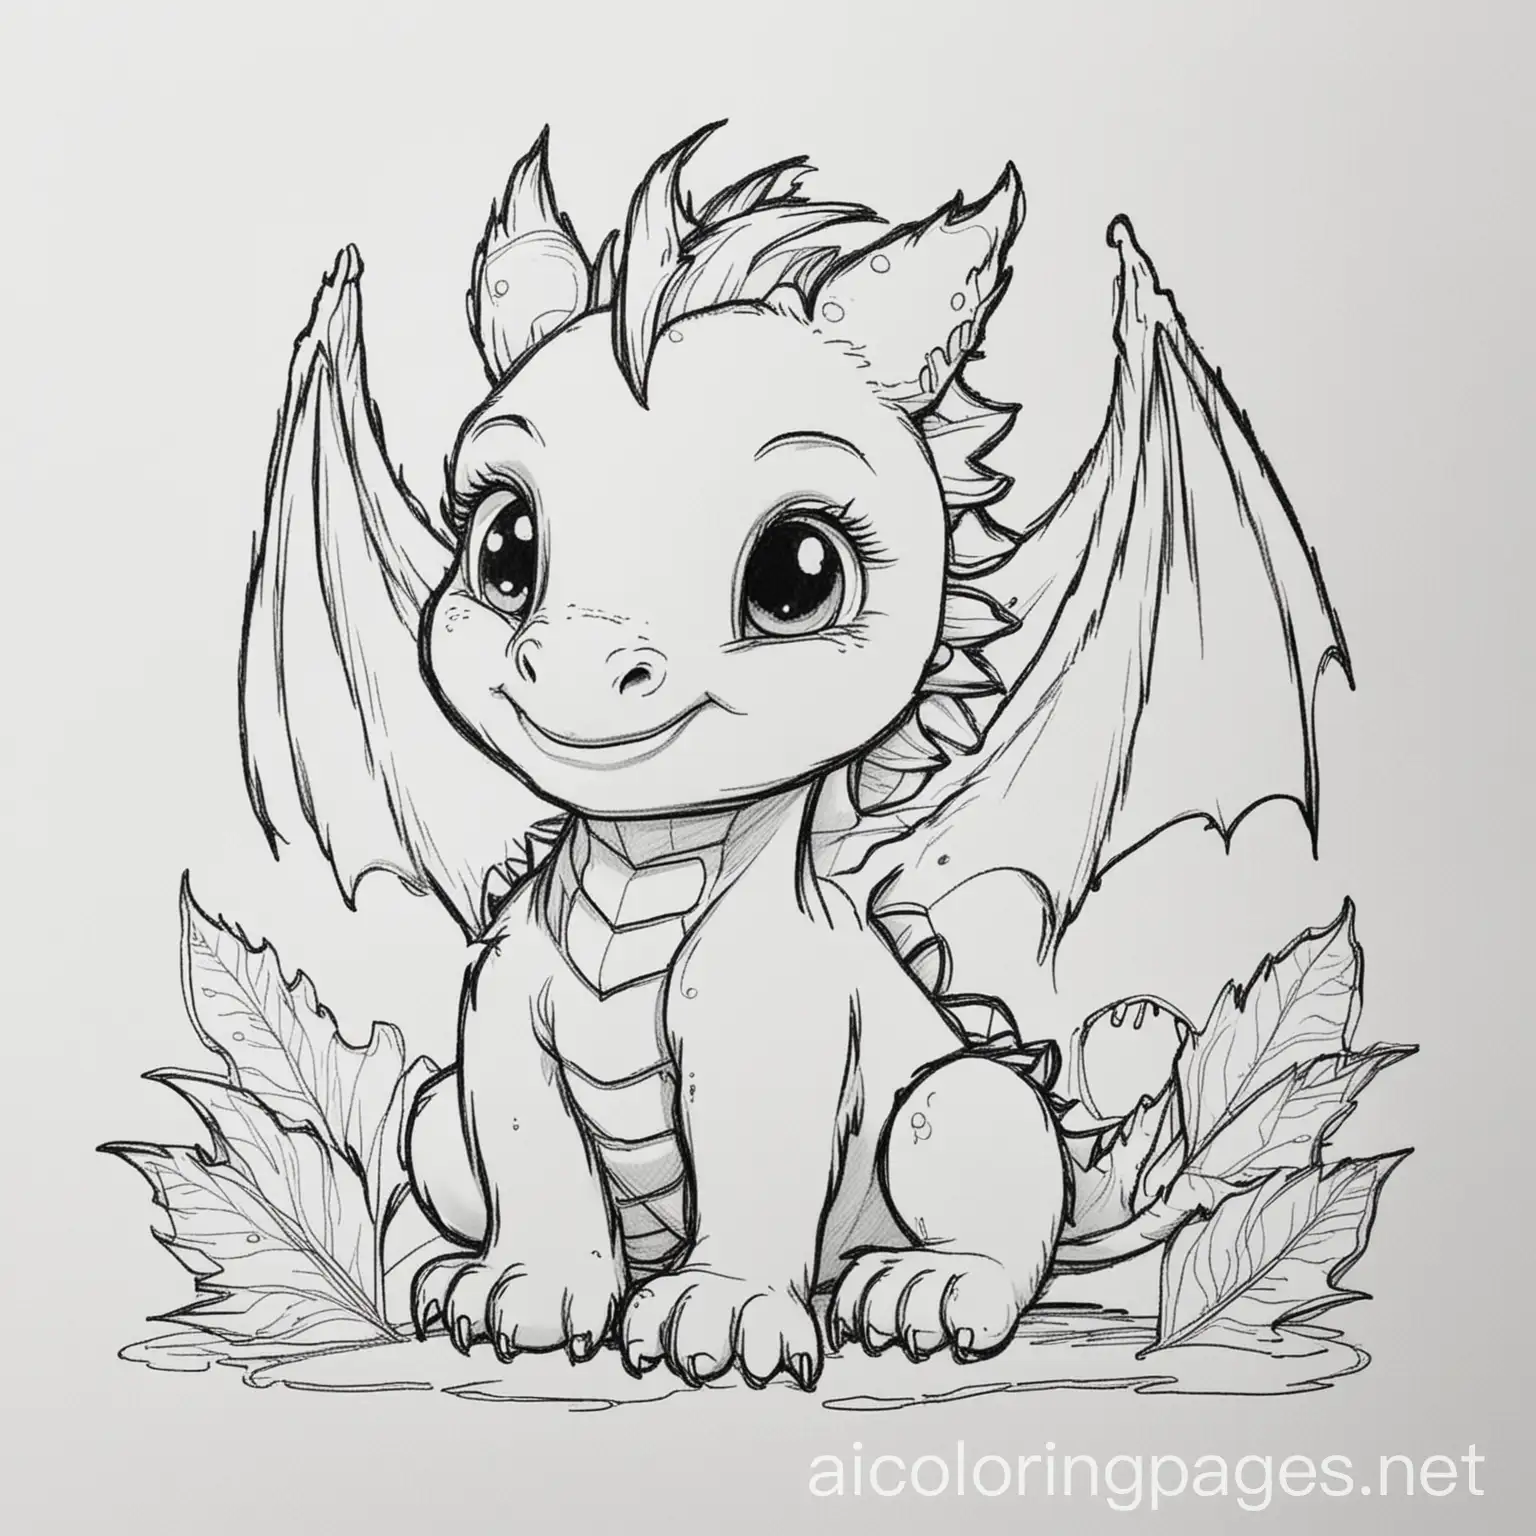 Baby-Dragon-Coloring-Page-Simple-Line-Art-for-Easy-Coloring